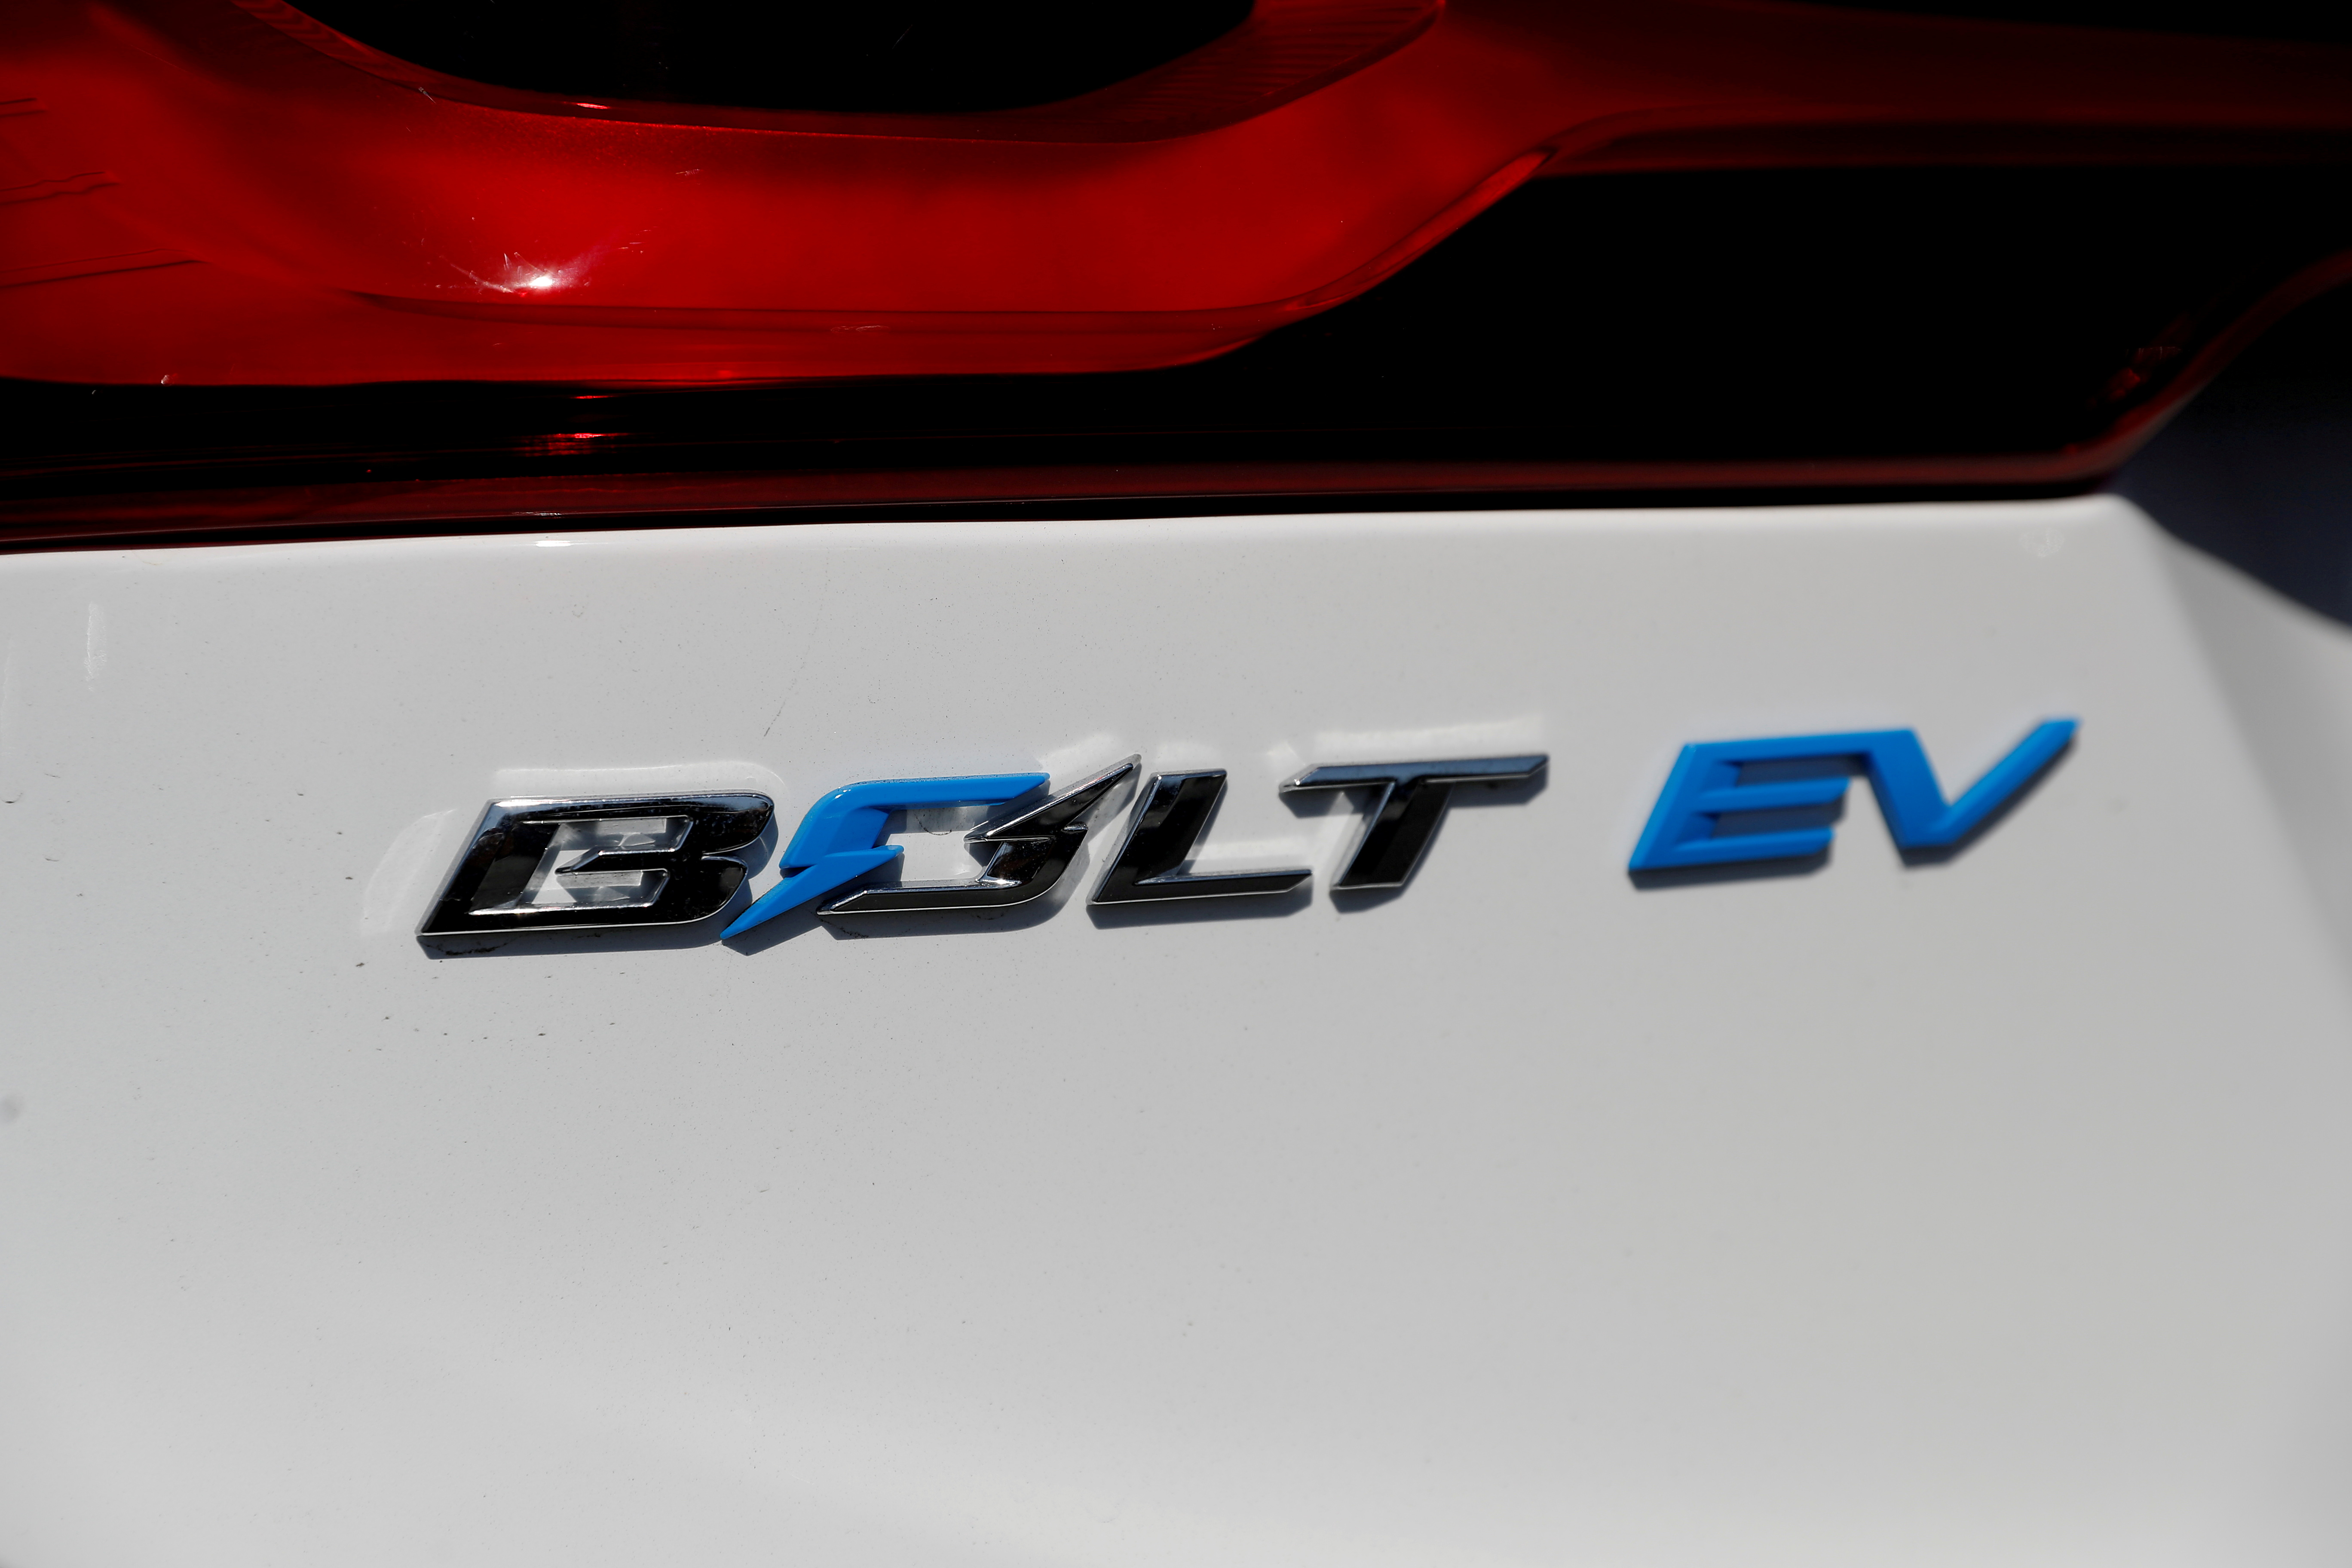 A close-up view of the Chevrolet Bolt electric vehicle logo is seen at Stewart Chevrolet in Colma, California